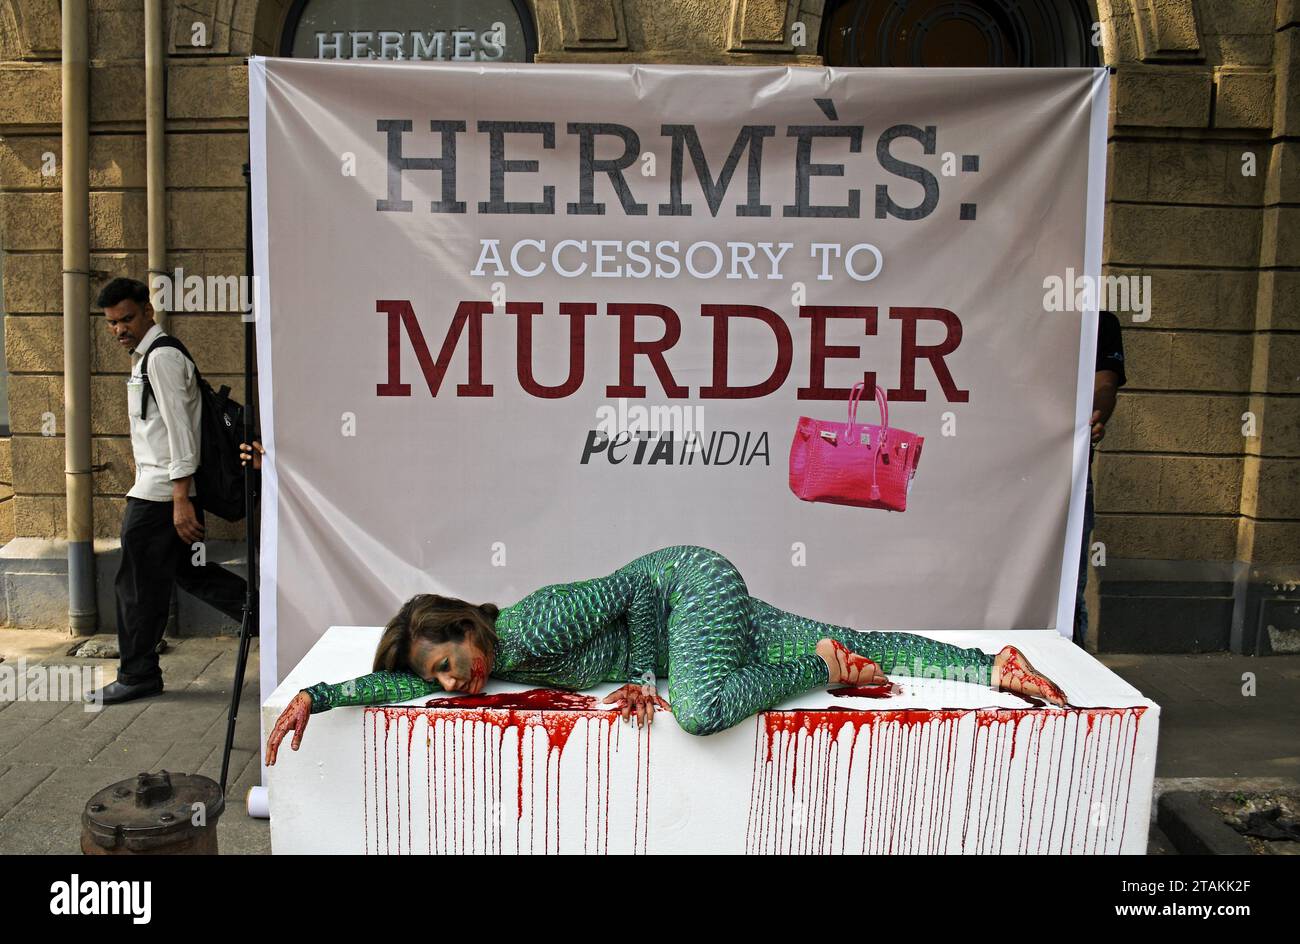 Mumbai, India. 01st Dec, 2023. Activist for the Ethical Treatment of Animals (PETA India) director Poorva Joshipura wearing a alligator-skin costume and lying in a pool of (fake) blood on a thermocol table is seen outside the French fashion store 'Hermes' in Mumbai. The PETA India director Poorva Joshipura calls on the French fashion house 'Hermes' to ban the use of alligators, crocodiles and other exotic animals who are tormented and killed for their skins to make leather bags and accessories by the brand. (Photo by Ashish Vaishnav/SOPA Images/Sipa USA) Credit: Sipa USA/Alamy Live News Stock Photo